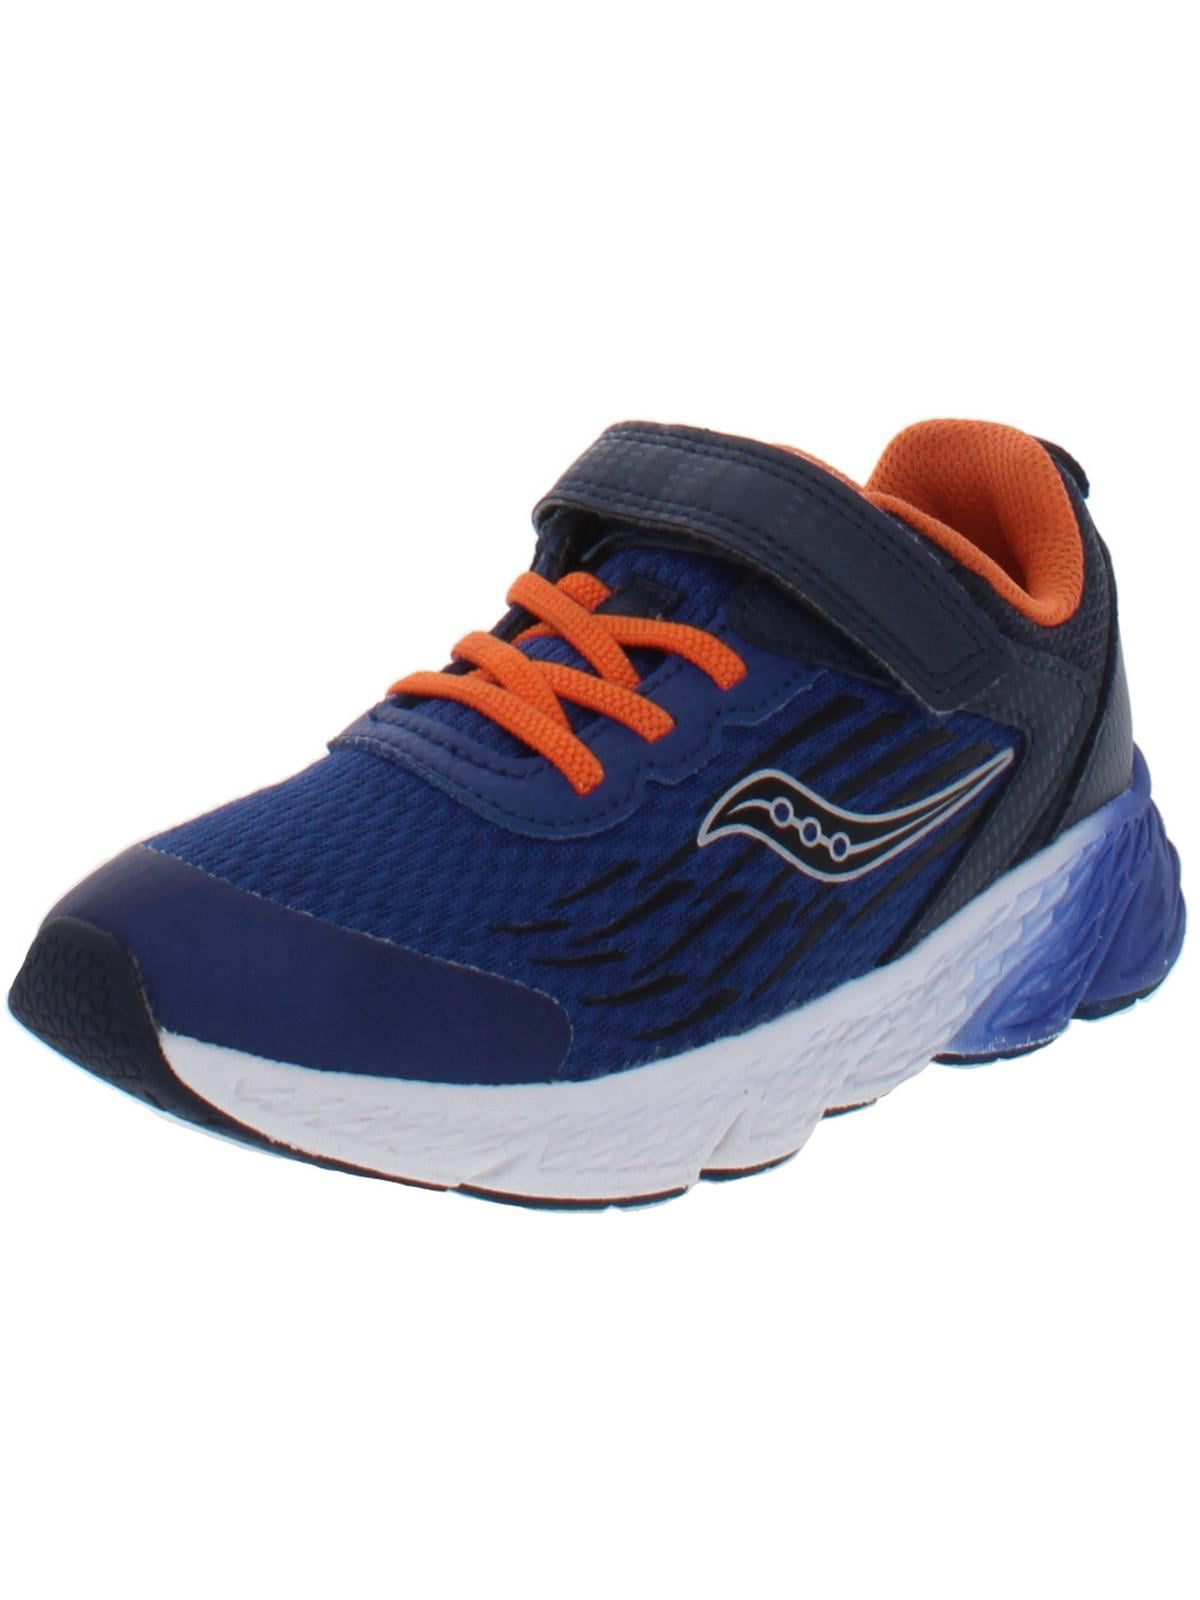 Saucony - Saucony Boys S-Wind A/C Leather Running Shoes Navy 13 Medium ...